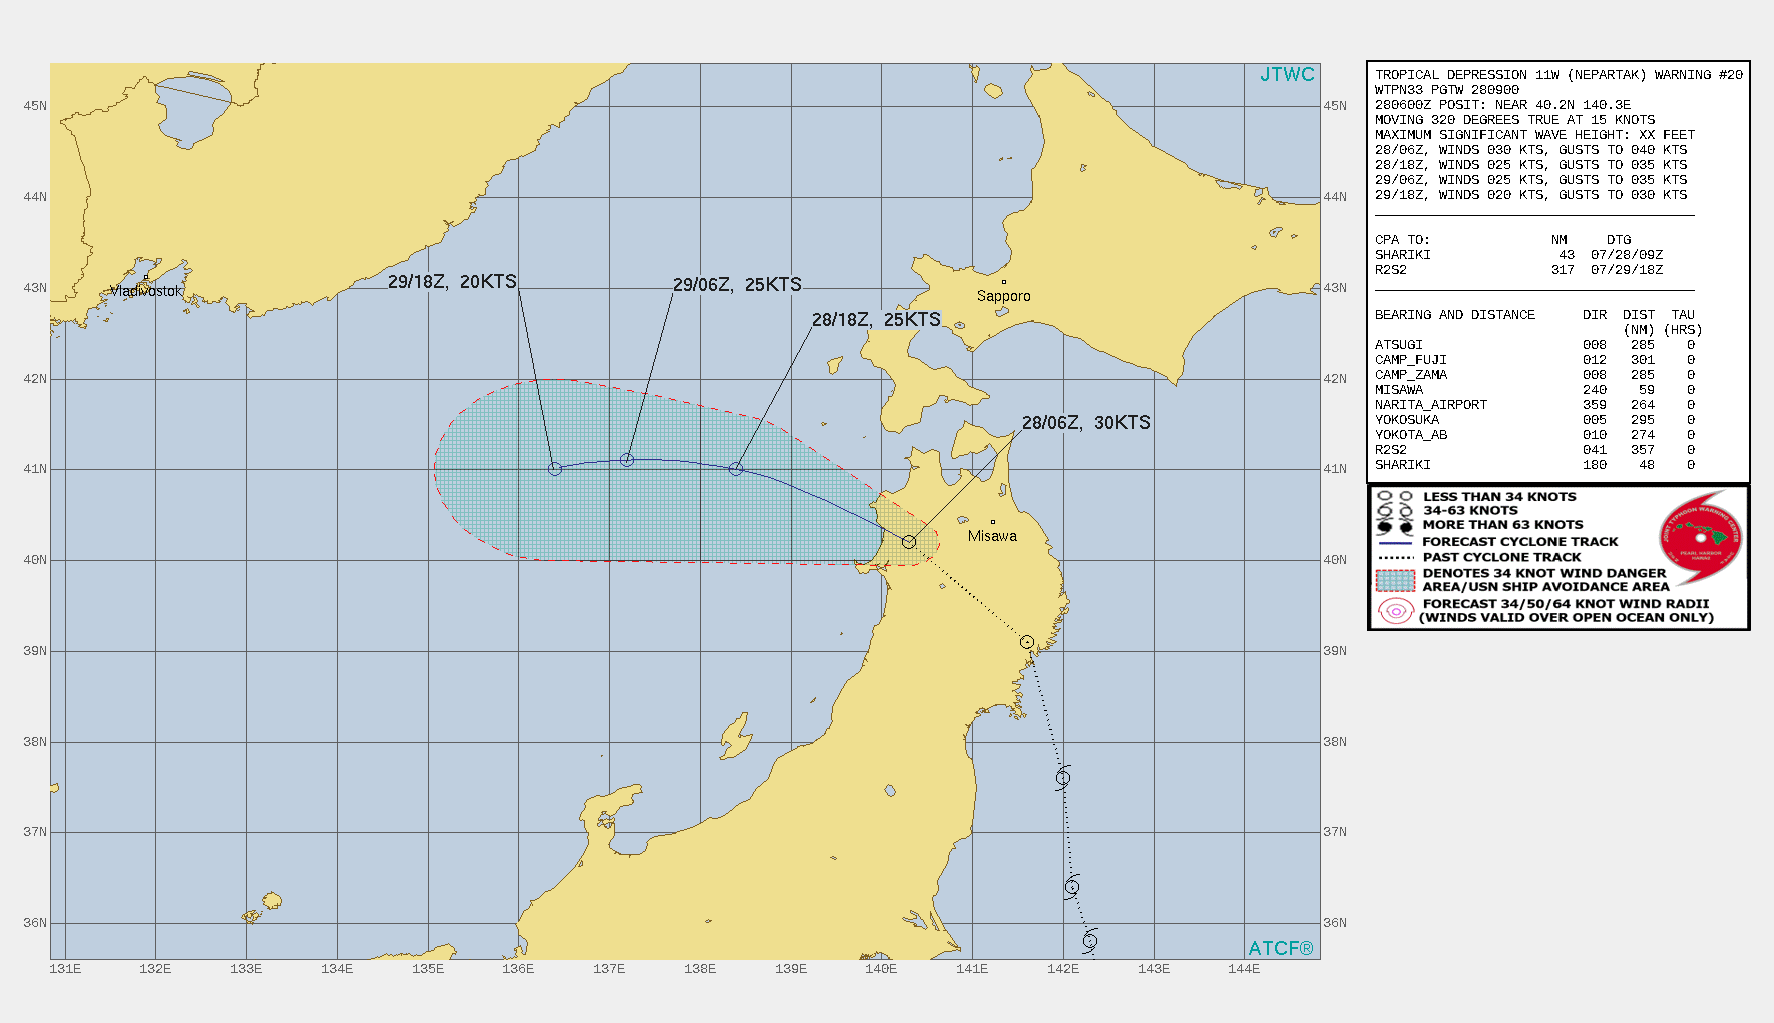 11W(NEPARTAK). WARNING 20 ISSUED AT 28/09UTC.THERE ARE NO SIGNIFICANT CHANGES TO THE FORECAST FROM THE PREVIOUS WARNING.  FORECAST DISCUSSION: 11W IS MOVING FAIRLY RAPIDLY ACROSS NORTHERN HONSHU, AND SHOULD REEMERGE OVER THE SEA OF JAPAN WITHIN THE NEXT FEW HOURS. AS THE EXTENSION OF THE SUBTROPICAL RIDGE BUILDS IN TO THE NORTH, THE SYSTEM WILL TRACK MORE WESTWARD AS IT MOVES INTO THE CENTRAL SEA OF JAPAN. AS THE TRACK HAS MOVED FURTHER NORTH THAN PREVIOUSLY FORECAST, IT WILL EMERGE OVER COOLER WATERS WITH SSTS BETWEEN 24 TO 25 CELSIUS, PRECLUDING ANY ADDITIONAL DEVELOPMENT. SIMULTANEOUSLY THE UPPER-LEVEL LOW WHICH HAS BEEN TRACKING OVER TOP OF 11W WILL STOP AND THEN MOVE EASTWARD OVER THE NEXT 24 HOURS, ALLOWING FOR AN UPPER-LEVEL JET STREAK TO MOVE OVER TOP OF 11W, DRASTICALLY INCREASING VERTICAL WIND SHEAR AND LEADING TO DISSIPATION OVER WATER NO LATER THAN 36H.